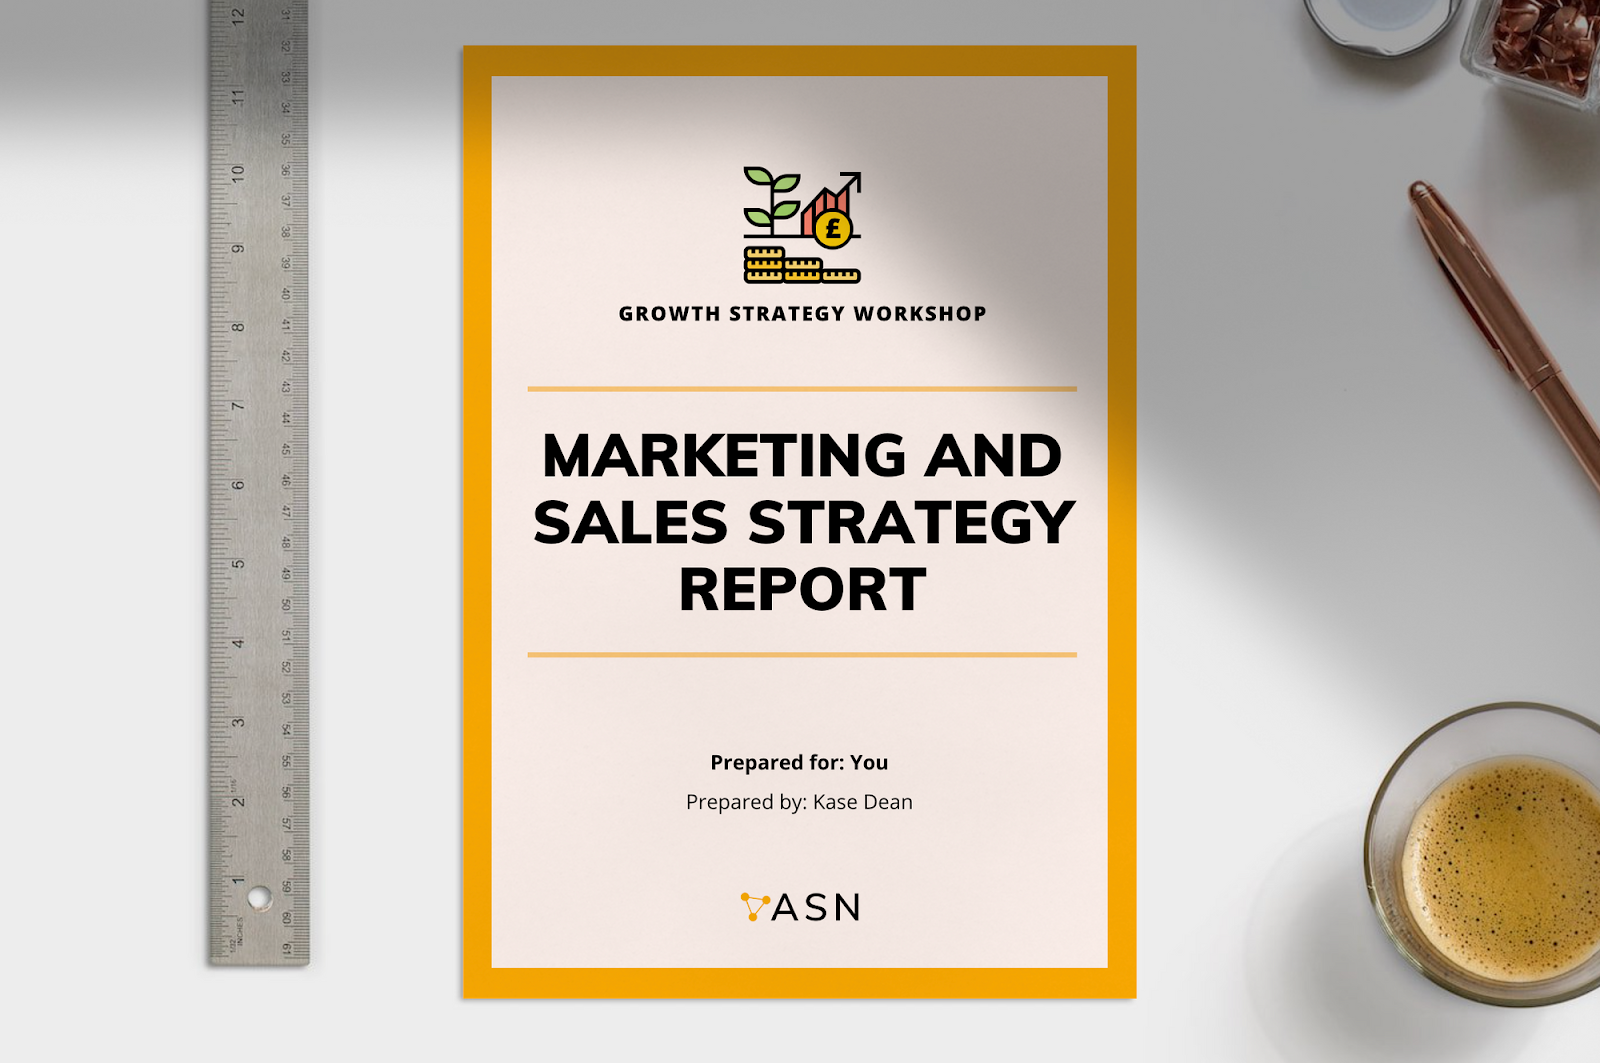 ASN Marketing Solutions - Marketing and Sales Strategy Report